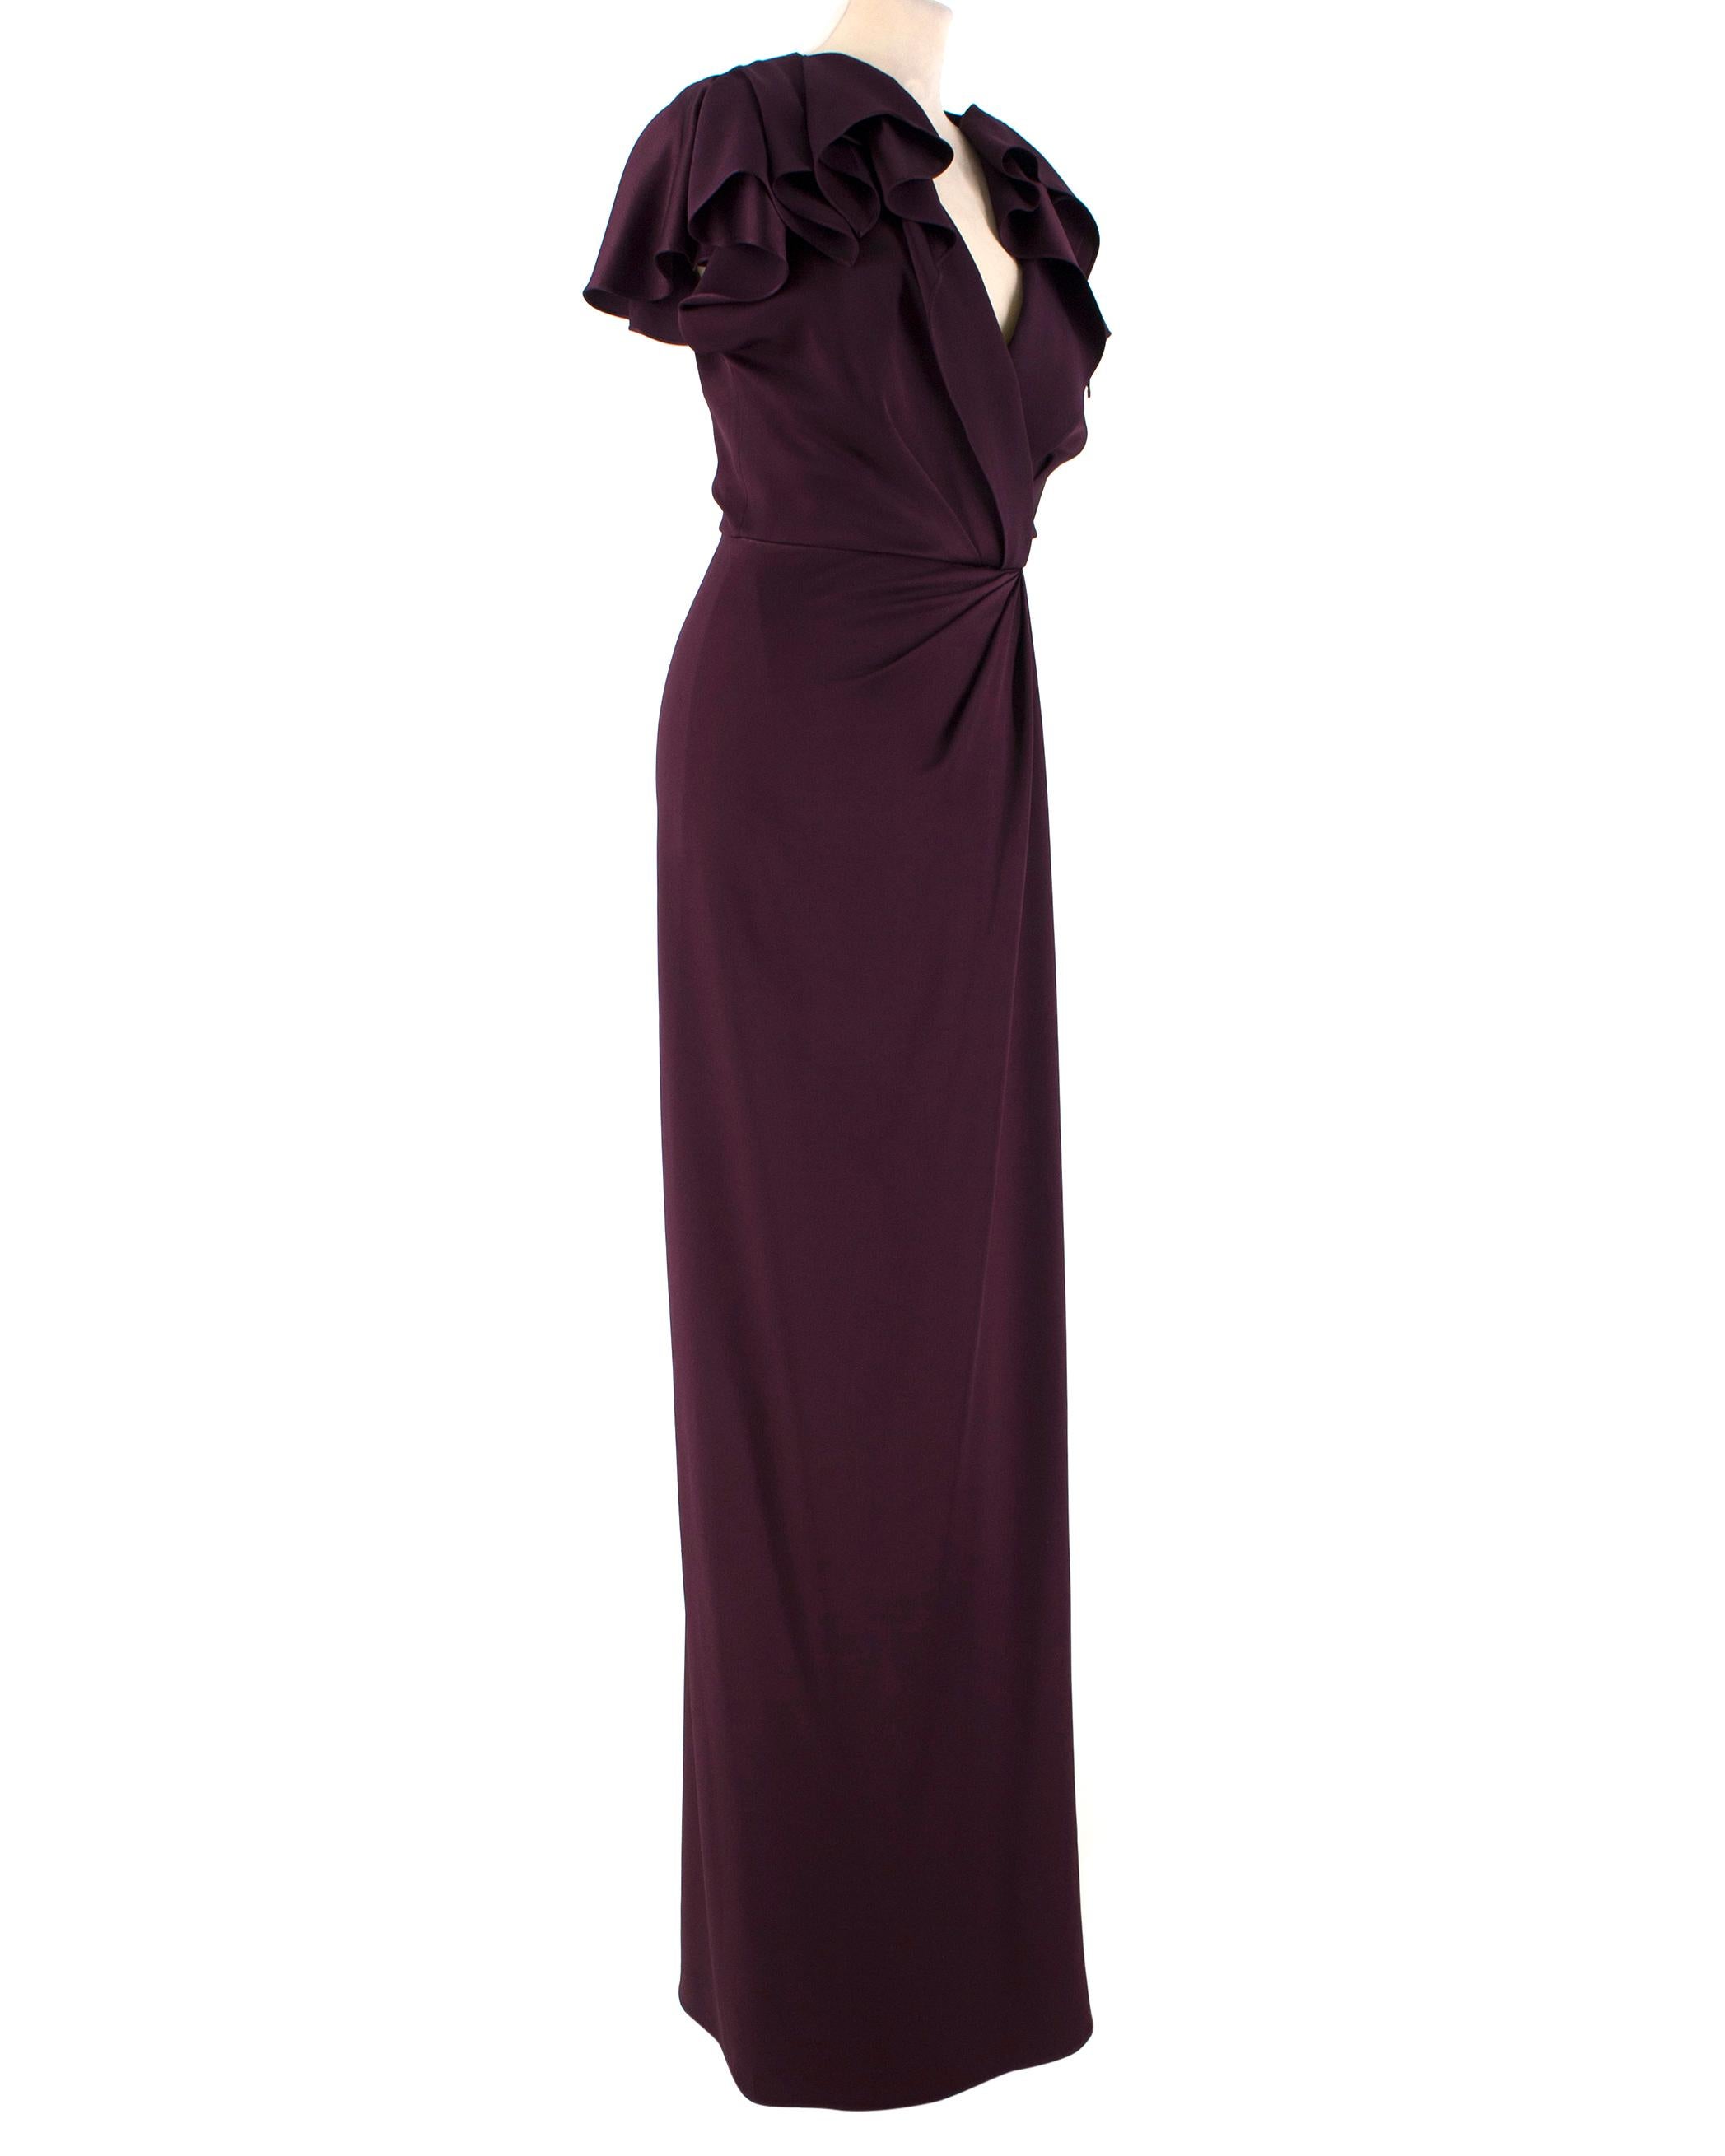 Jenny Packham Ruffle-Front Purple Gown

-Purple gown with ruffle details at the shoulder
-Gathered pleats at waist
-High slit
-Back zip closure
-Interior attached top slip with adjustable straps

Please note, these items are pre-owned and may show